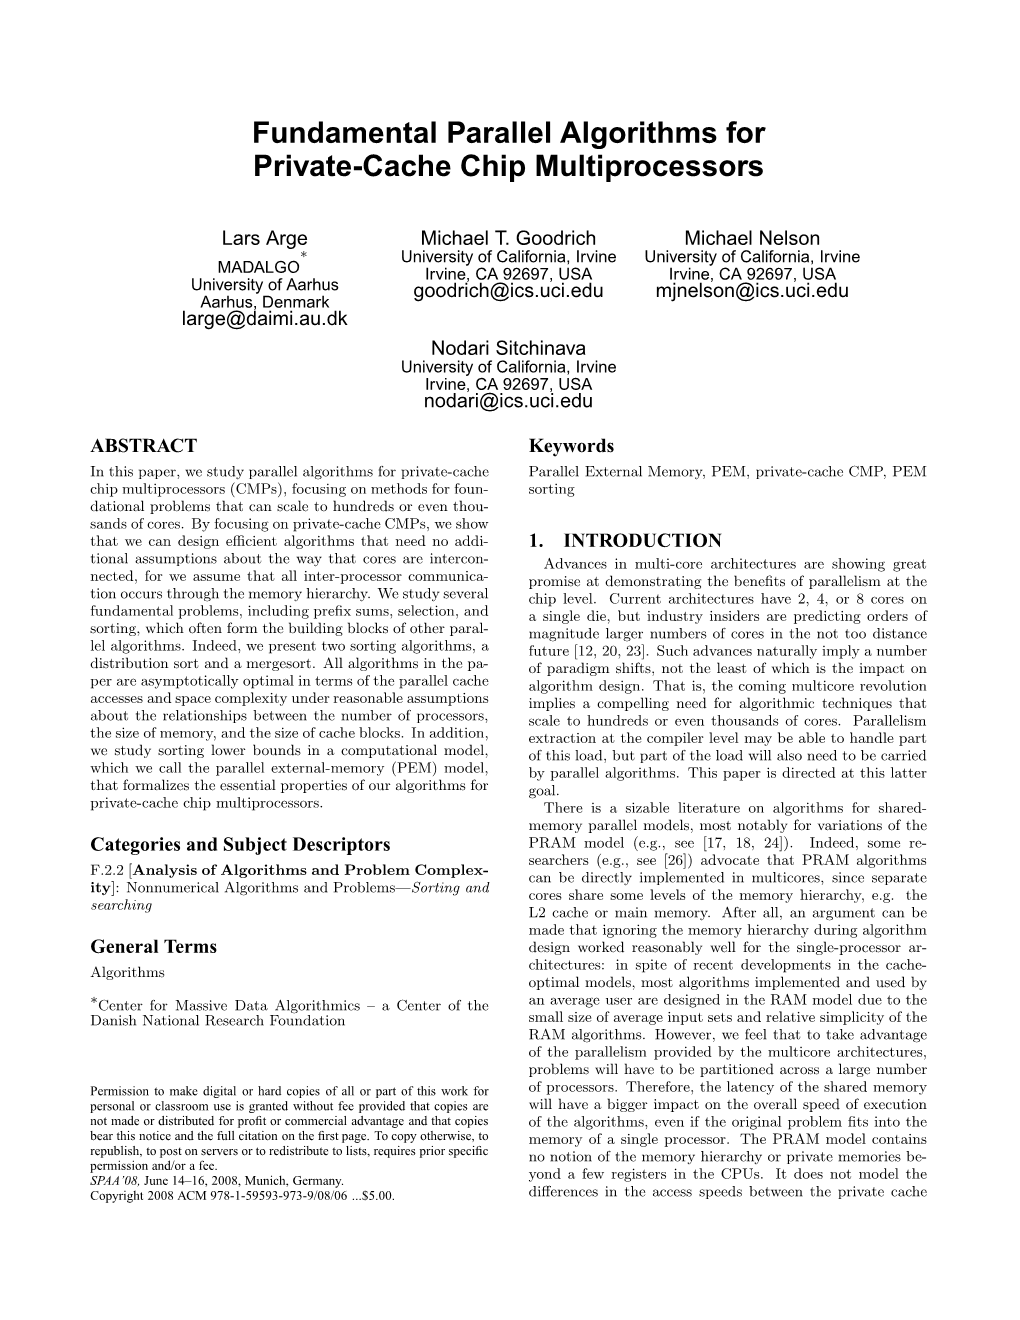 Fundamental Parallel Algorithms for Private-Cache Chip Multiprocessors